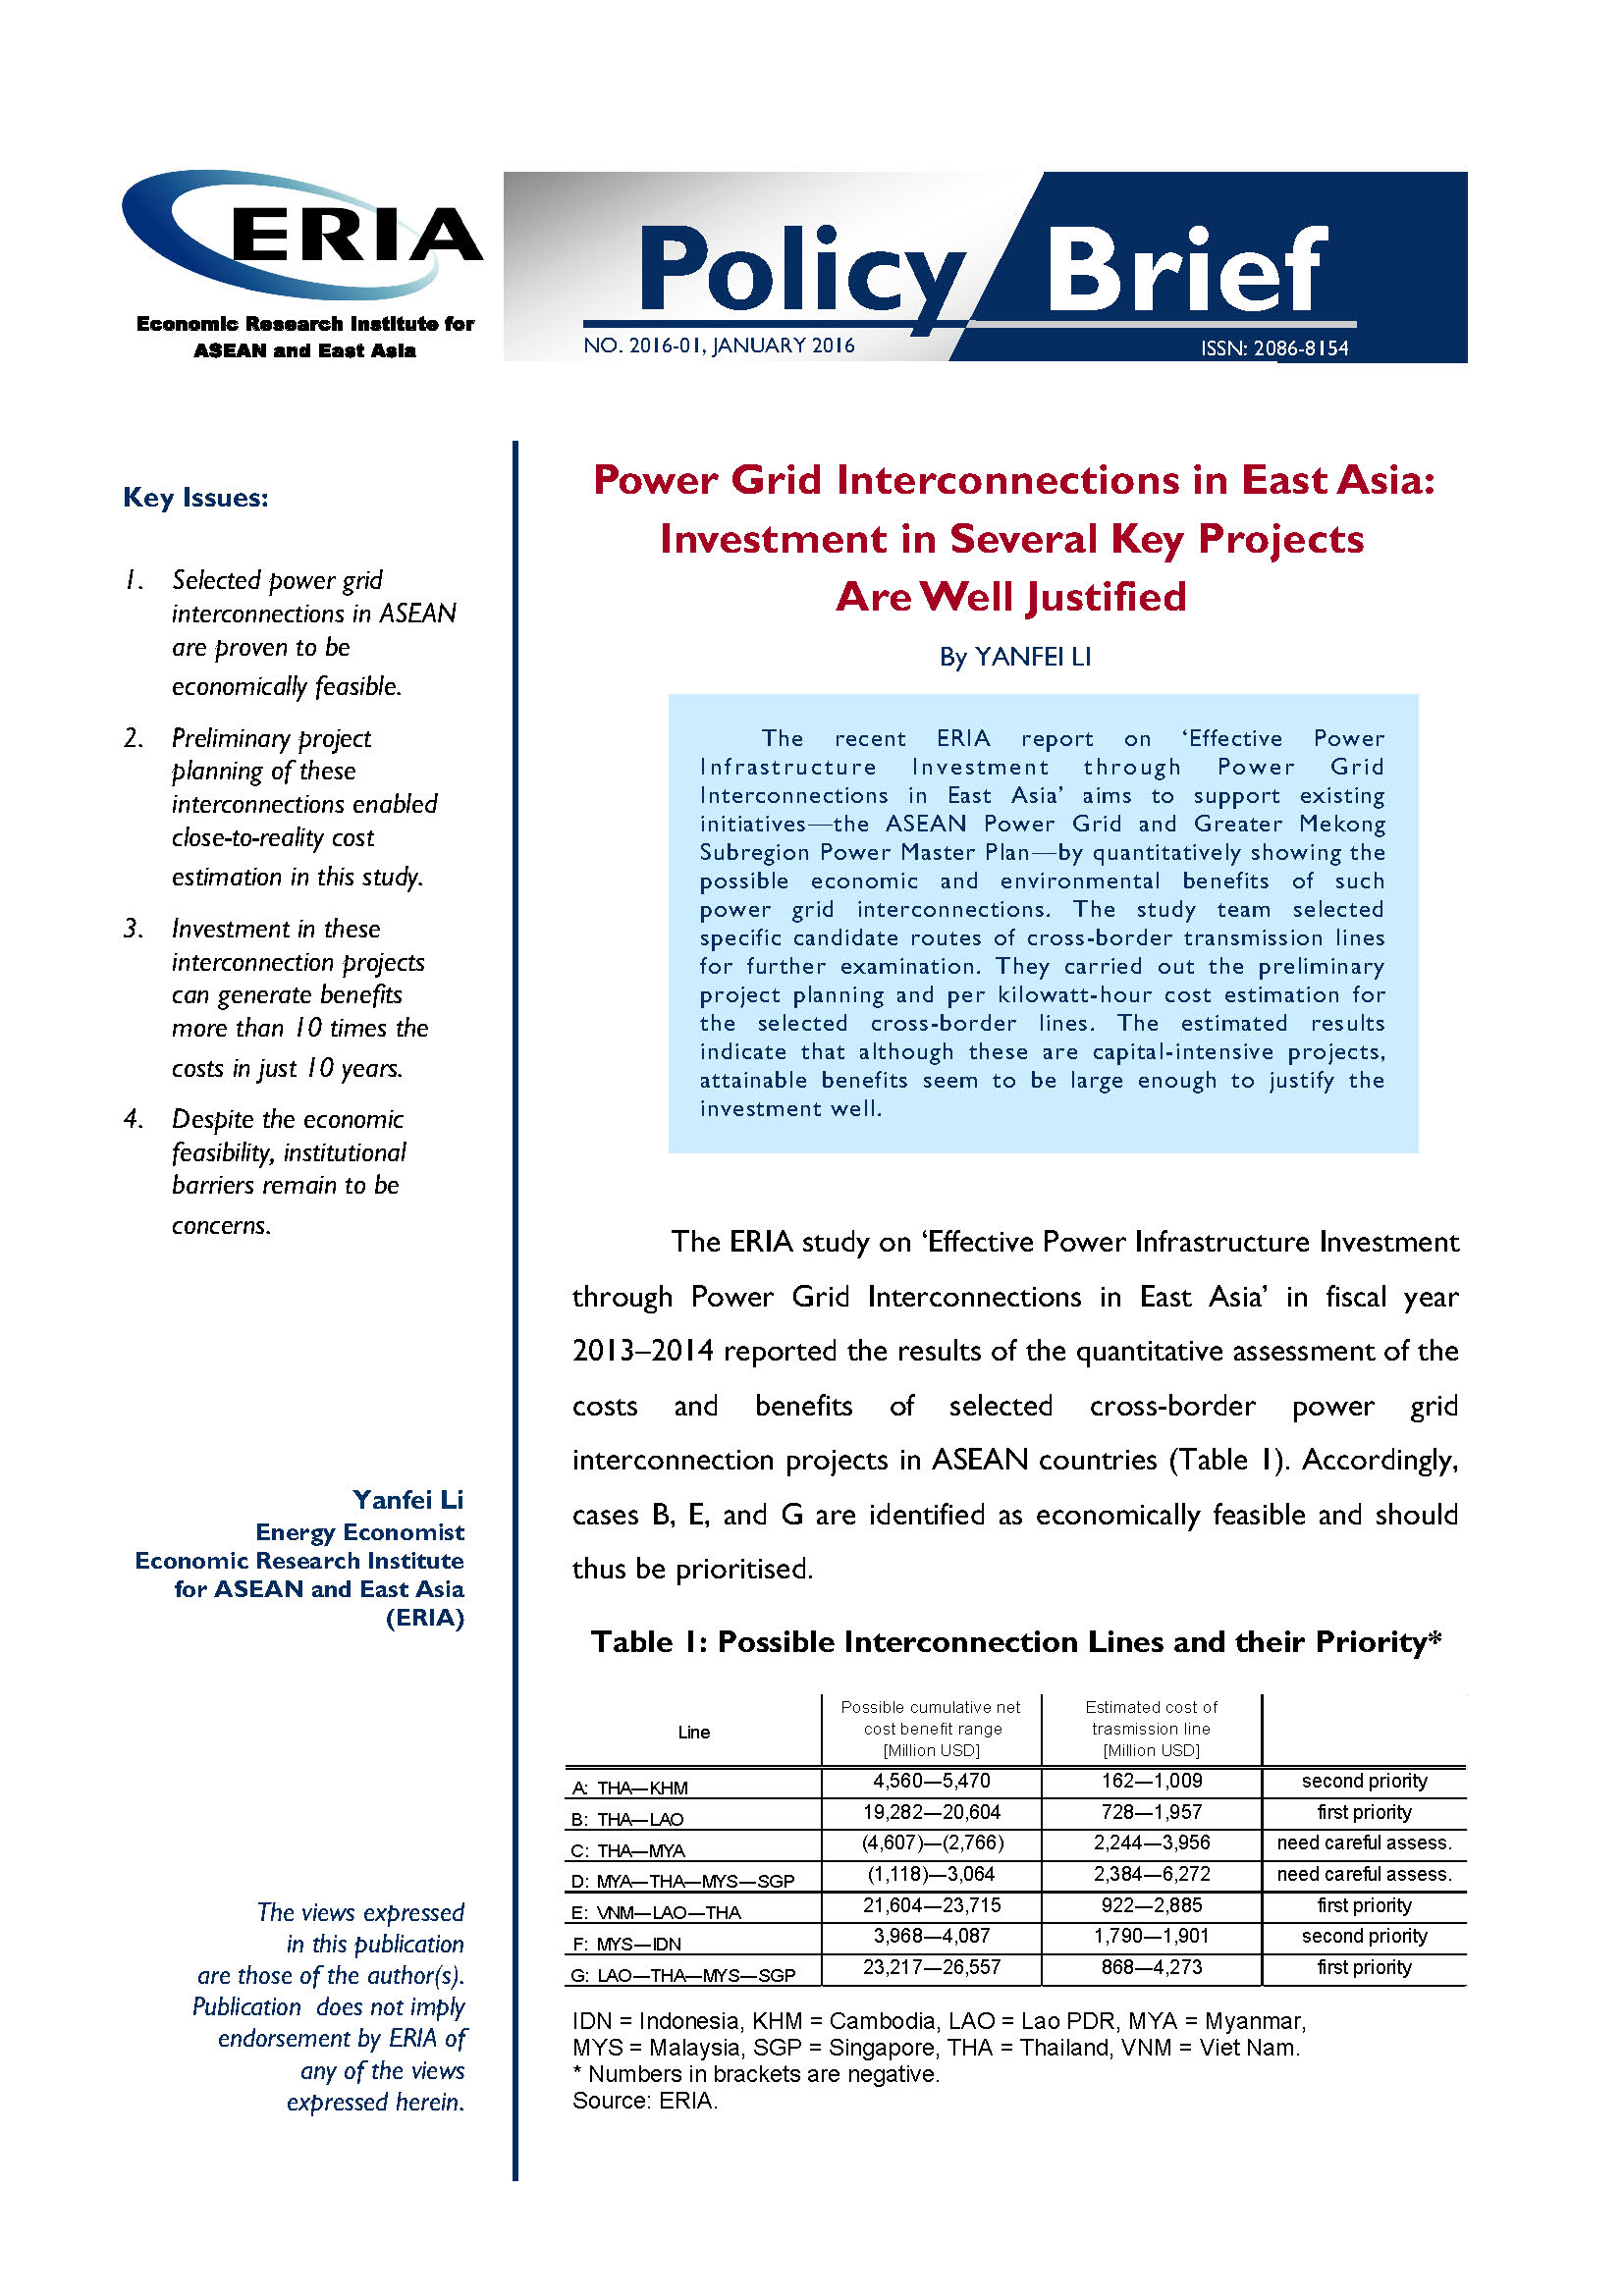 Power Grid Interconnections in East Asia: Investment in Several Key Projects Are Well Justified